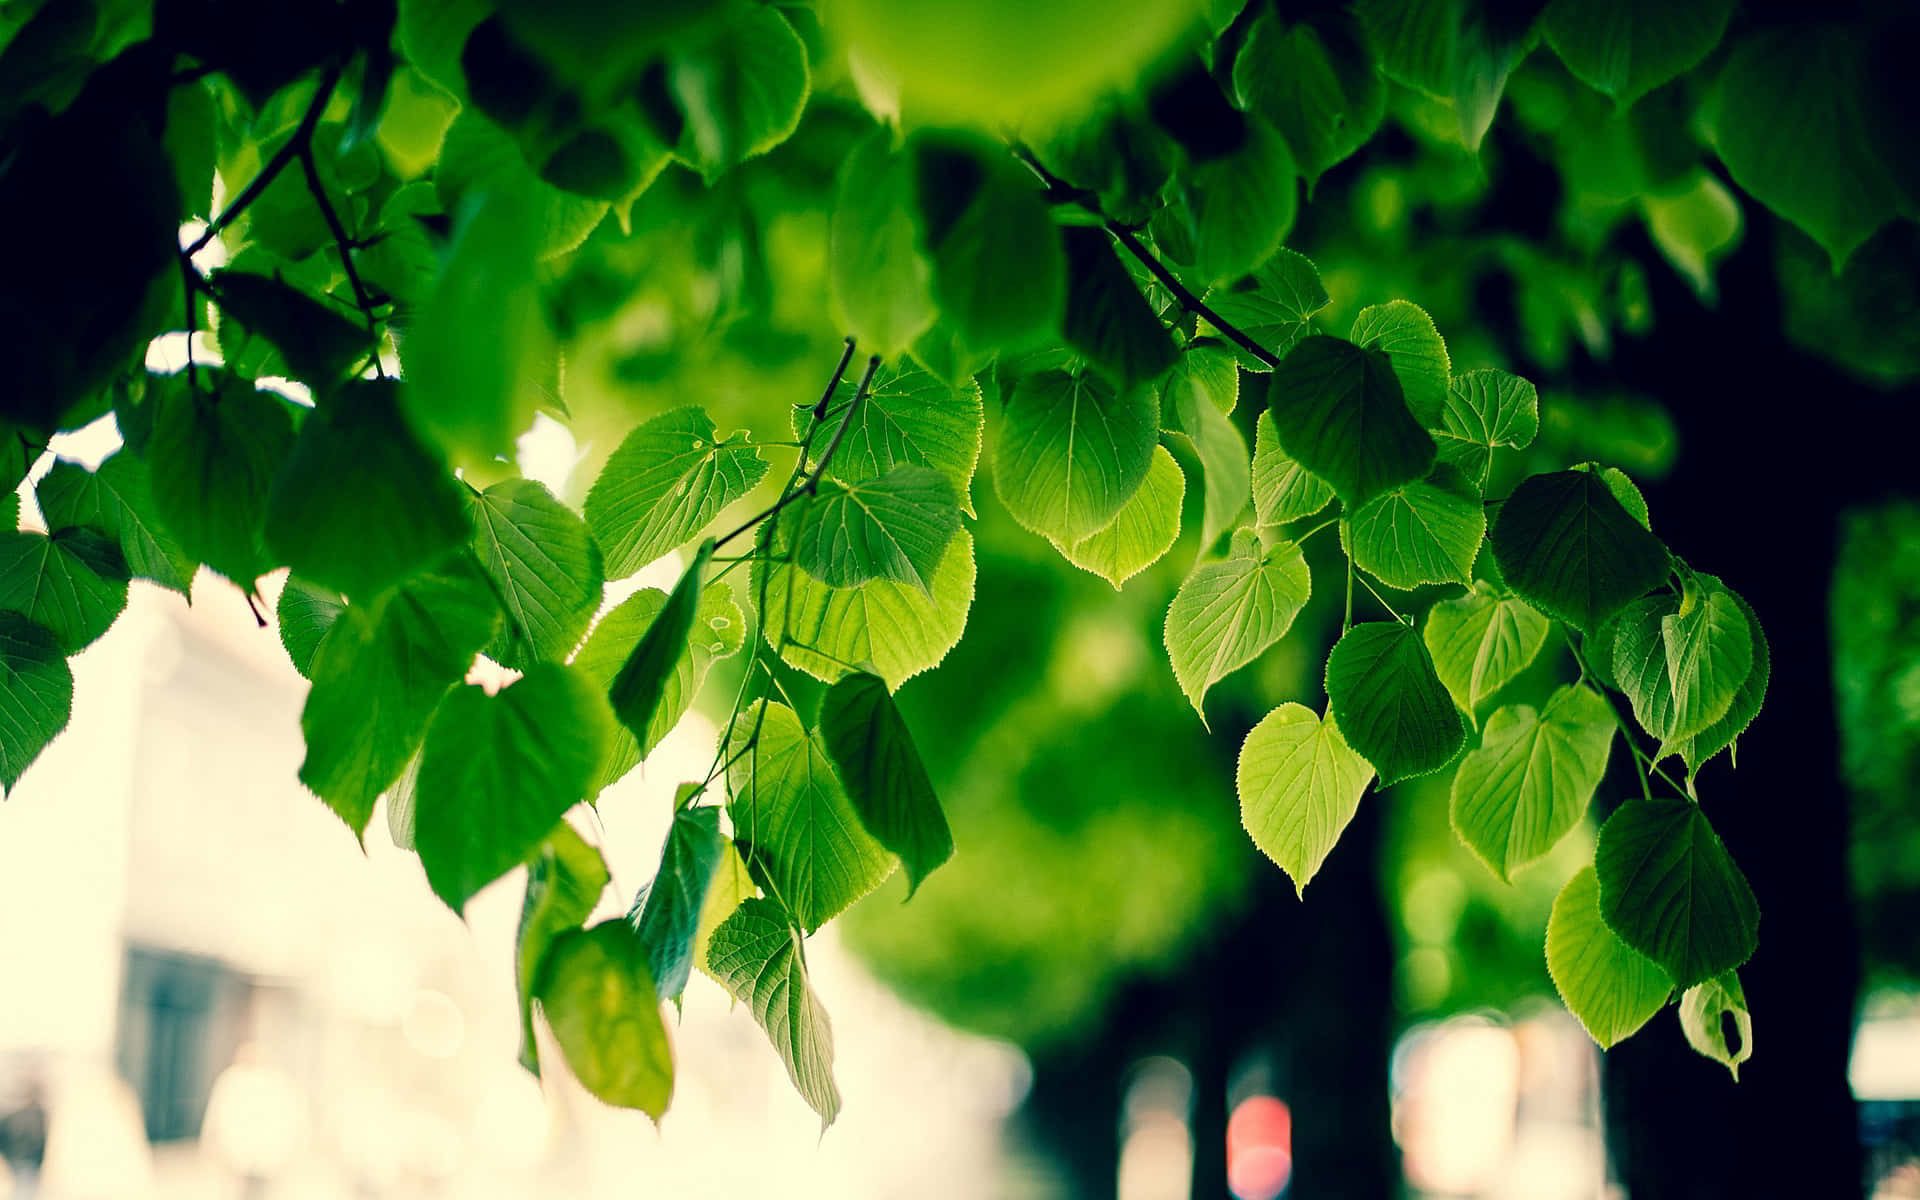 Refreshing Summer View of a Green Tree